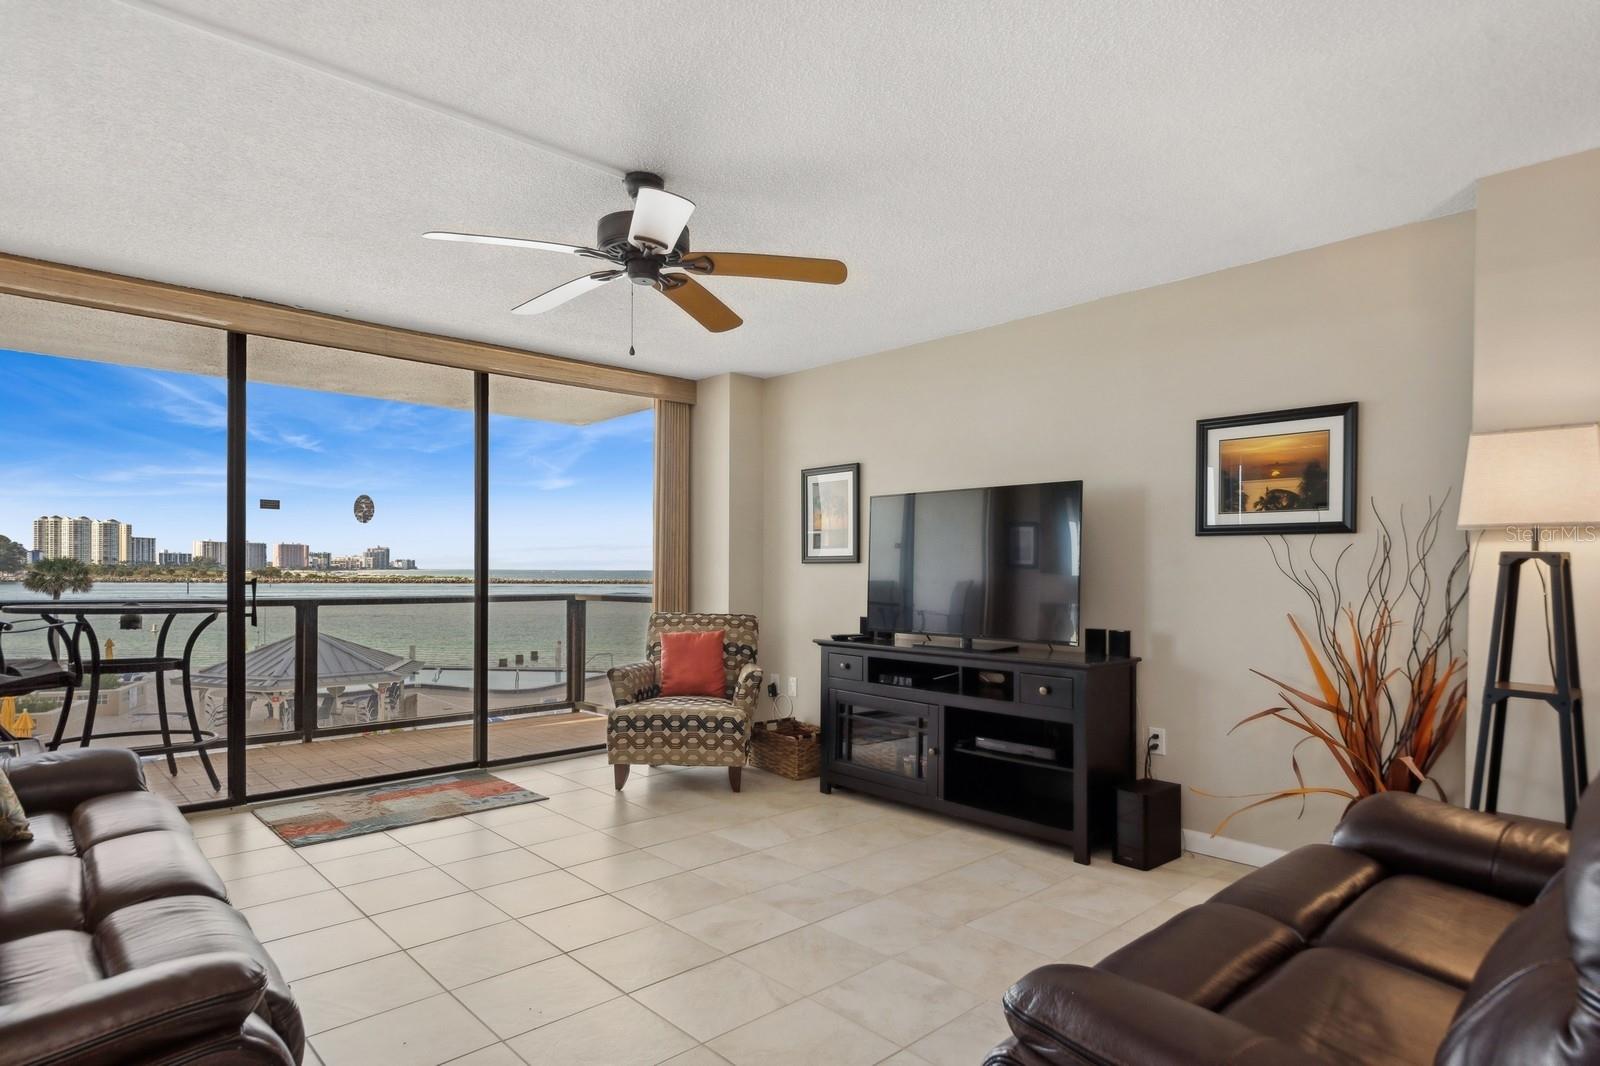 Living Room opens directly to the Balcony overlooking the Pool Deck, Pool, Clearwater Pass and Sand Key.